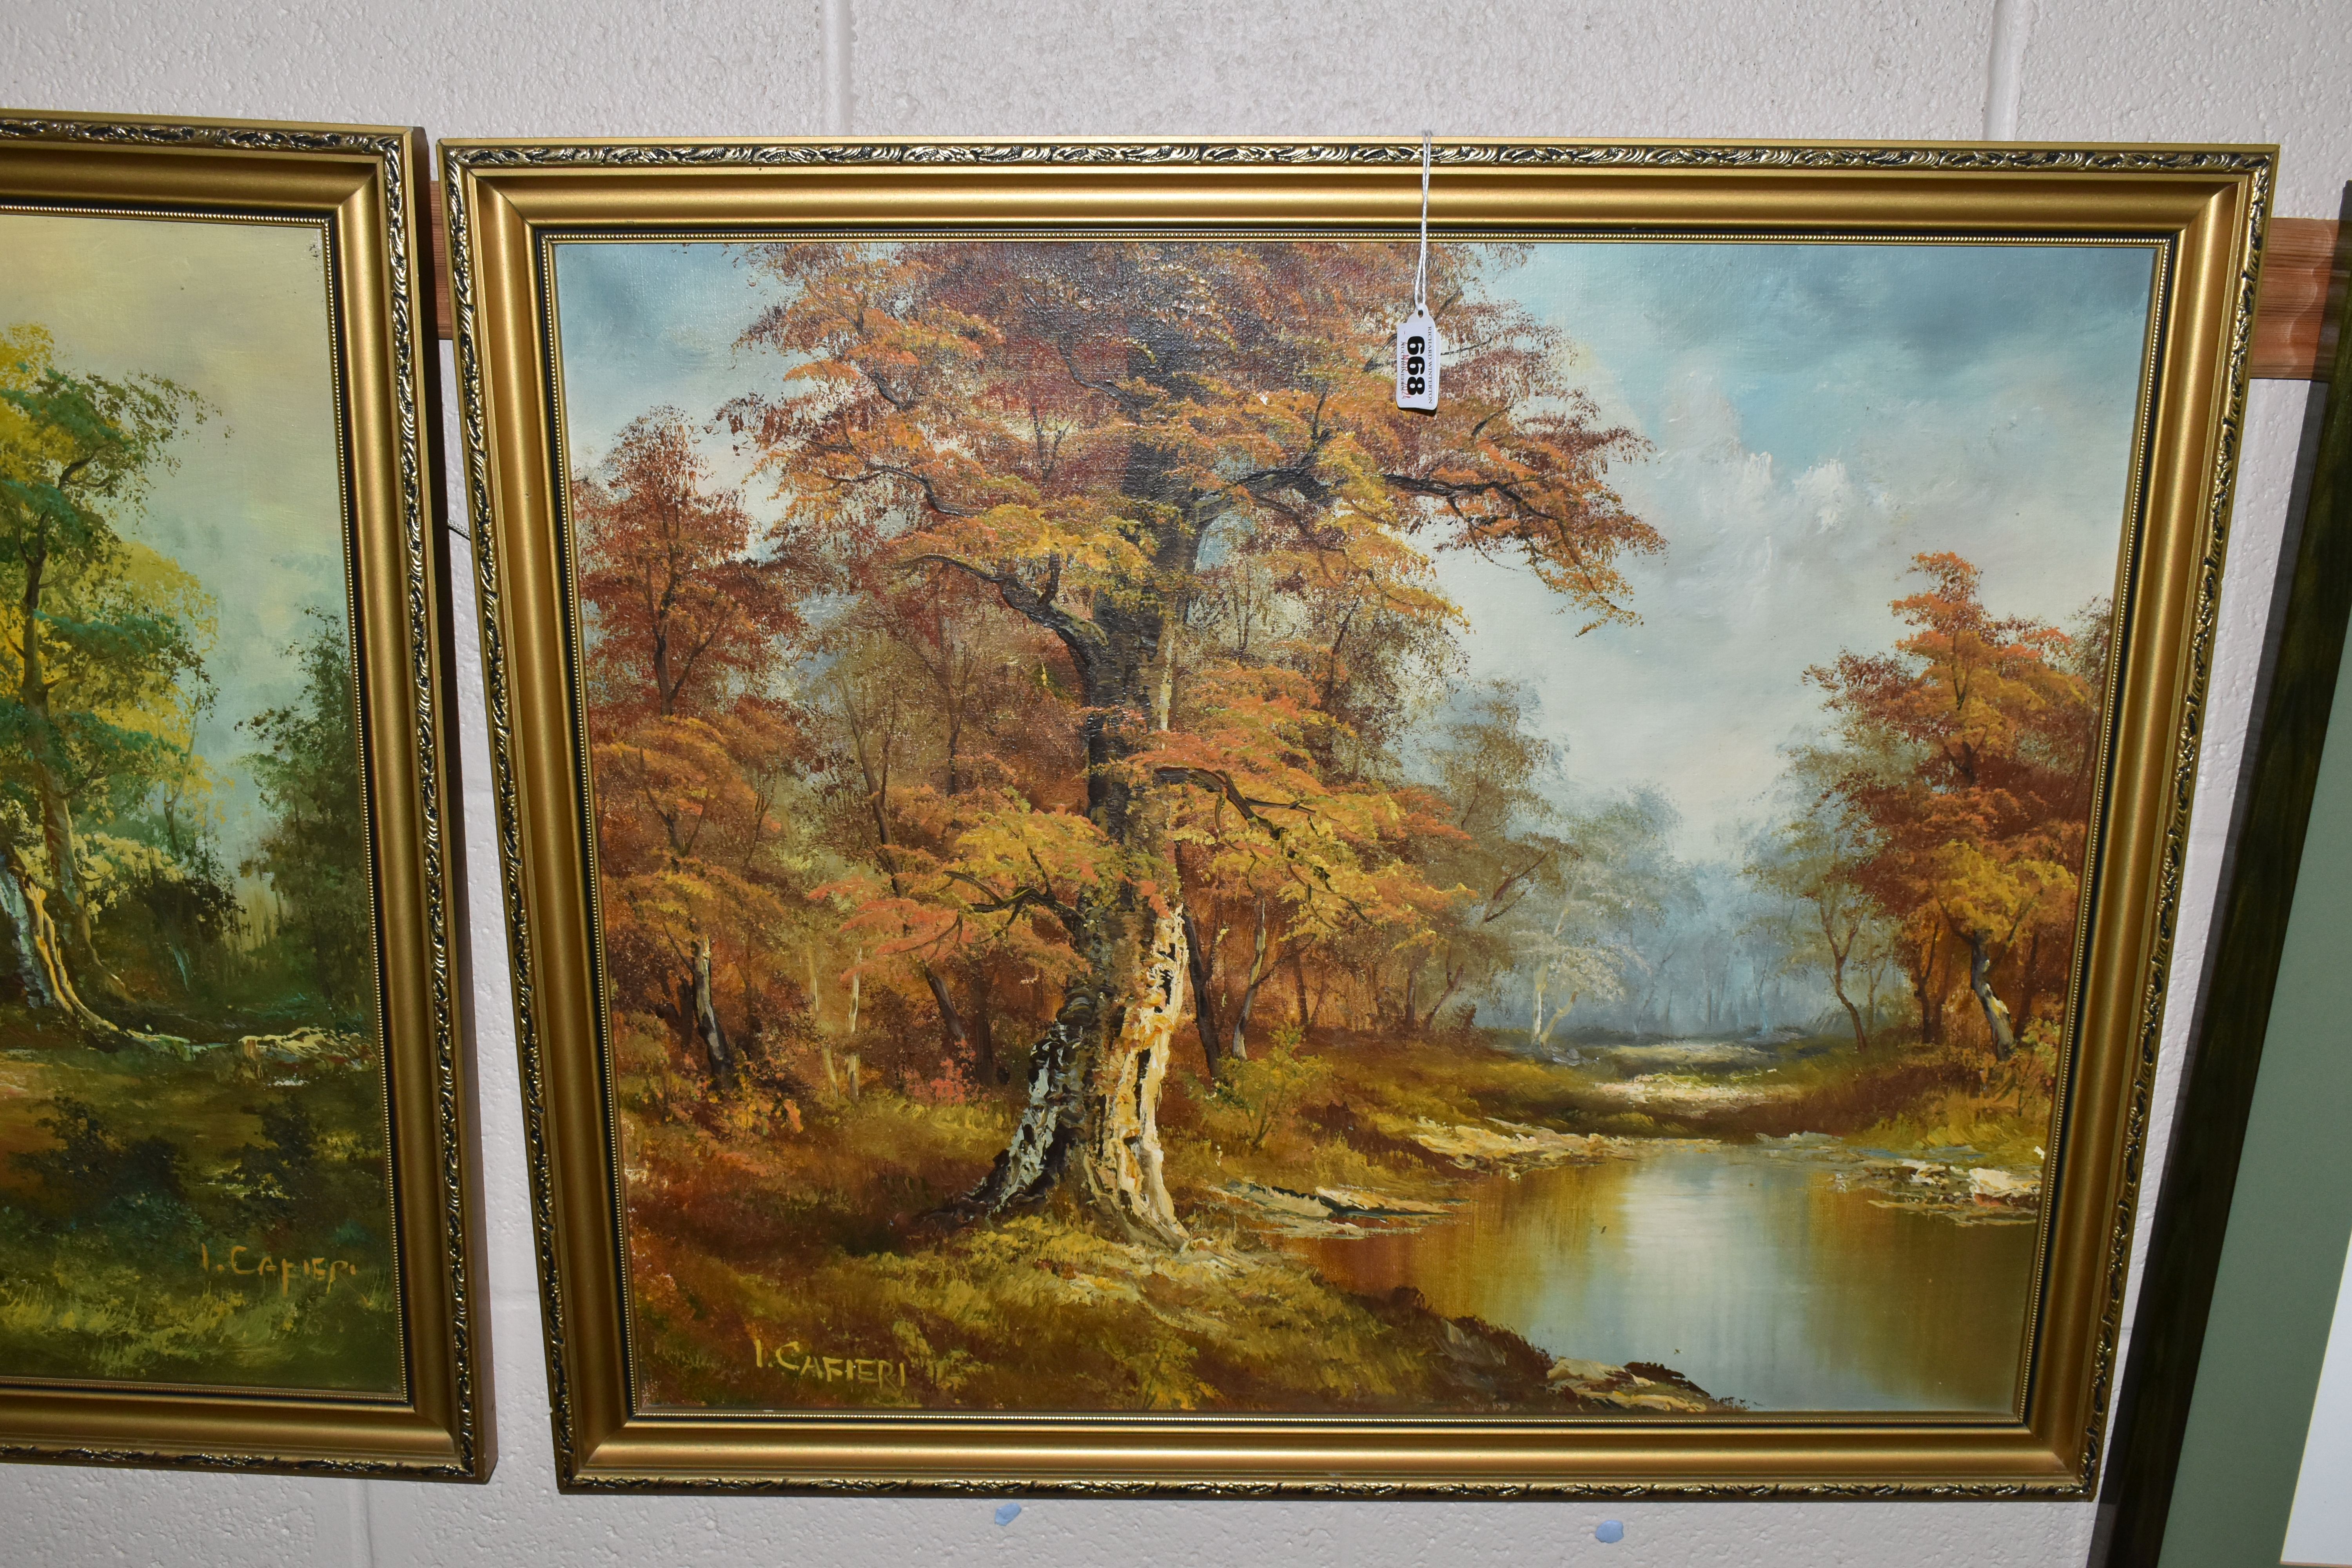 I. CAFIERI (MODERN) Two landscape scenes, oils on canvas, signed lower left and right, 49cm x - Image 2 of 4